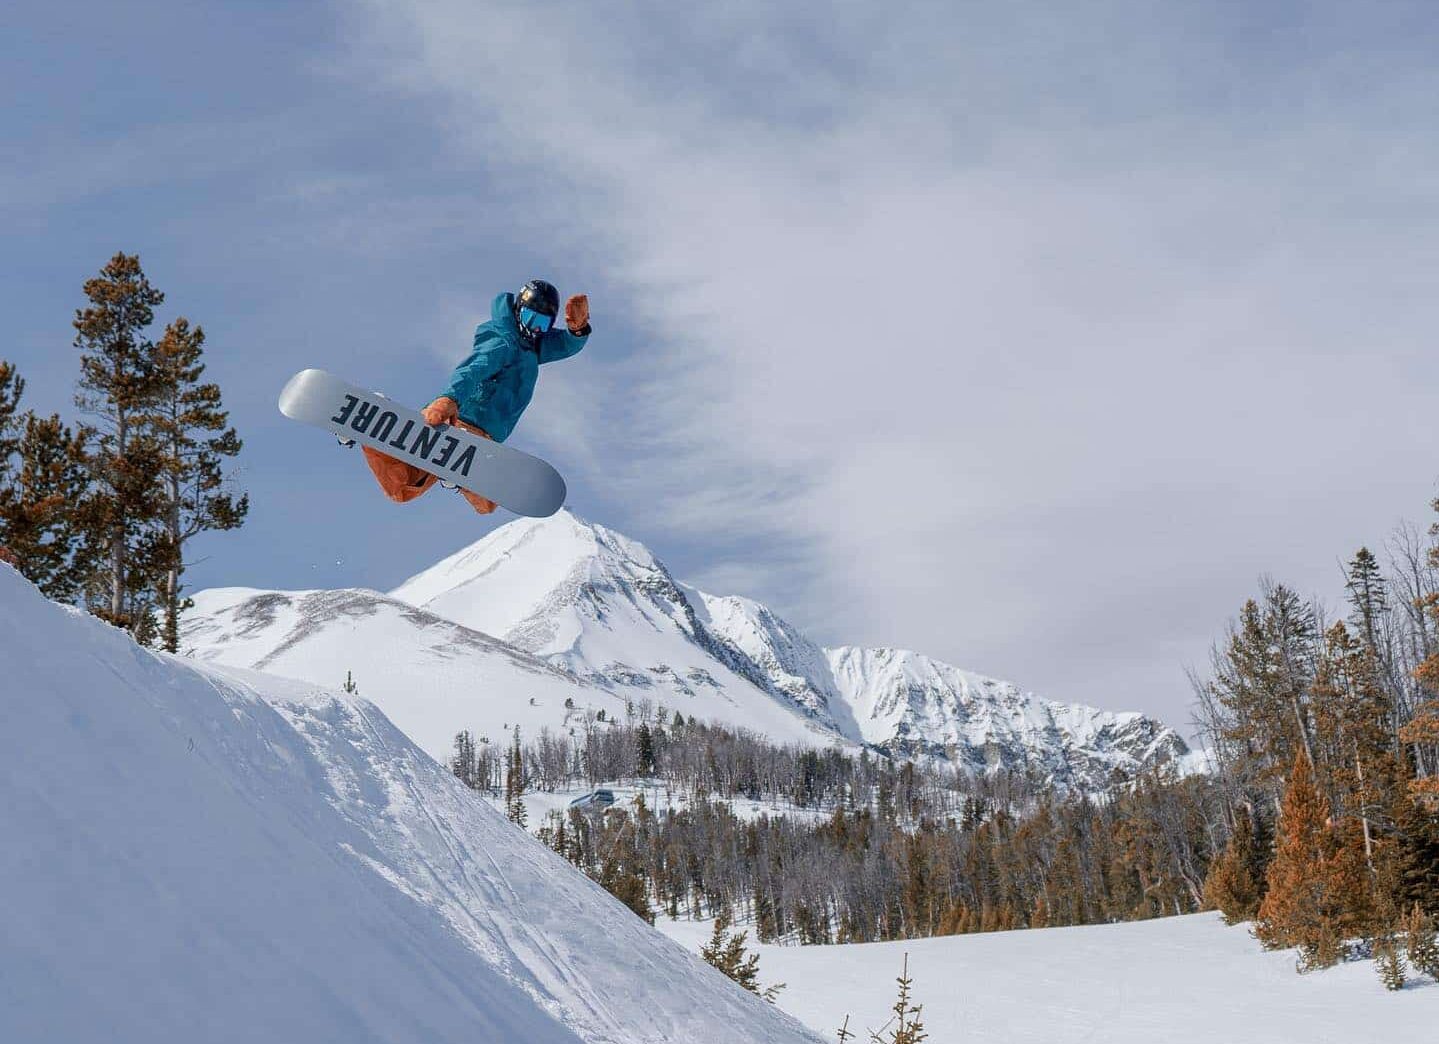 Snowboarder in blue jacket in the air after a jump on a white Venture snowboard